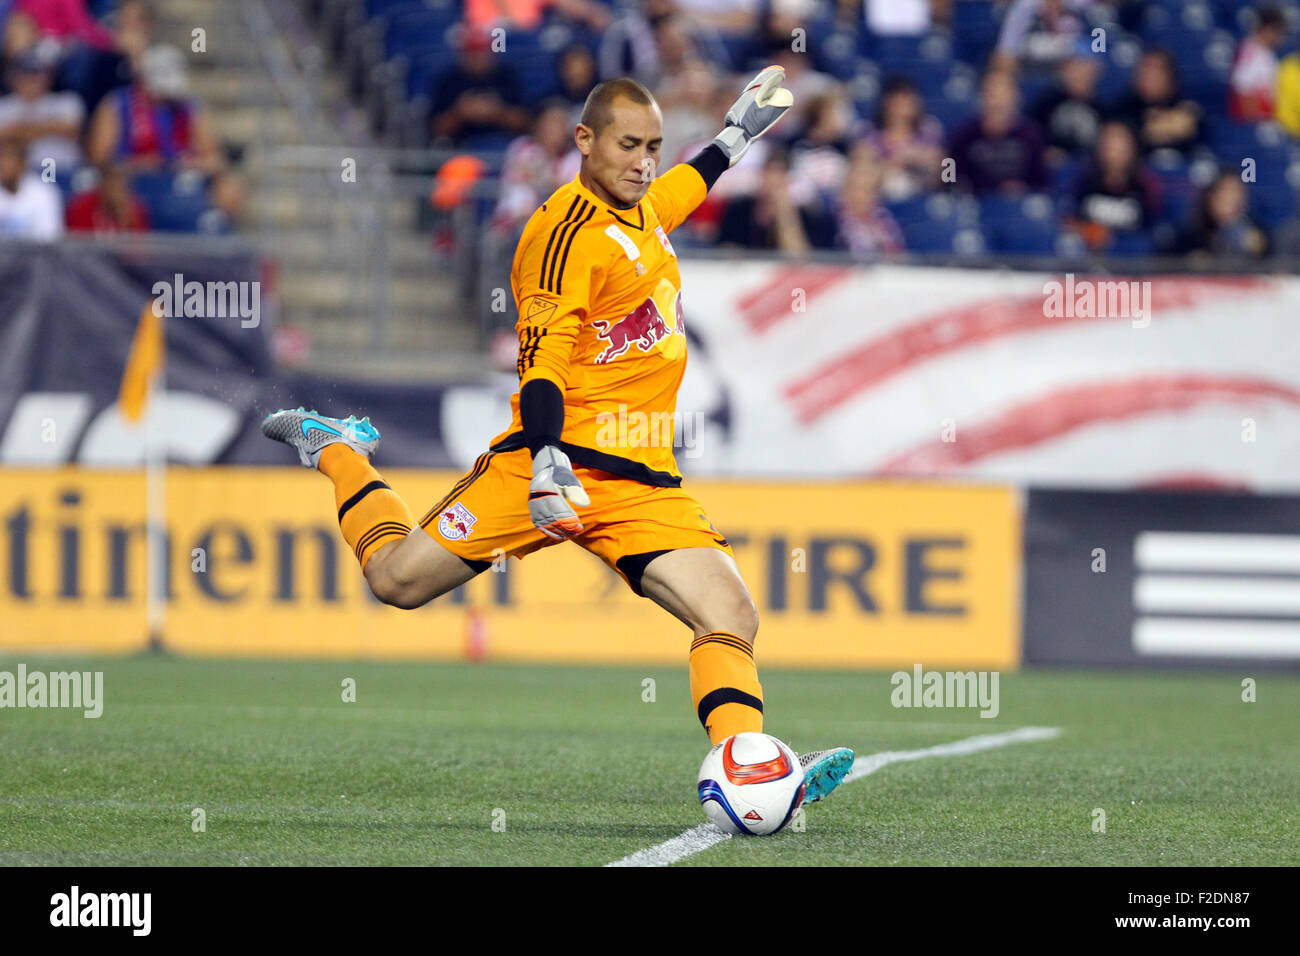 Foxborough, Massachussetts, USA. 16th September, 2015. New York Red Bulls goalkeeper Luis Robles (31) puts the ball in play during the second half of the MLS game between the New England Revolution and New York Red Bulls at Gillette Stadium. New England defeated New York 2-1. Credit:  Cal Sport Media/Alamy Live News Stock Photo